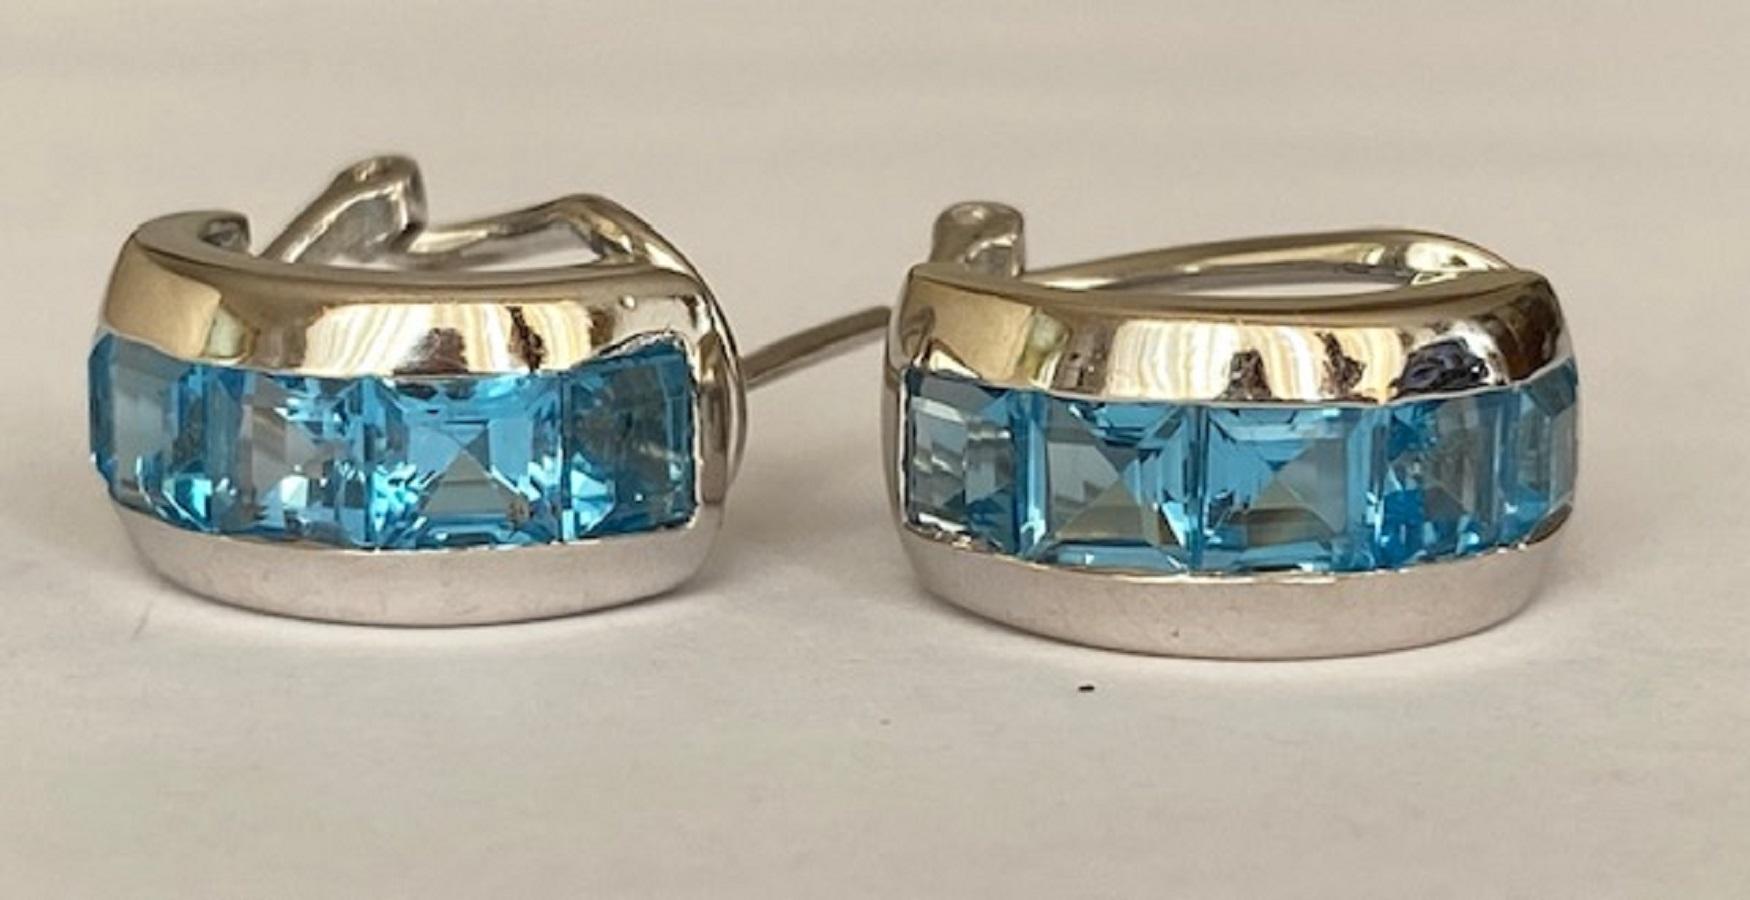 Offered in good condition: 18 kt white gold earrings with princess cut topazes of approx. 4.00 ct.
Grade: 750 (marked)
Size of the earrings is 19 mm x 7 mm
Citrine: approx. 4.00 ct (0.40 ct *10 pcs)
Weight: 7.8 grams
Comes in a jewellery  box